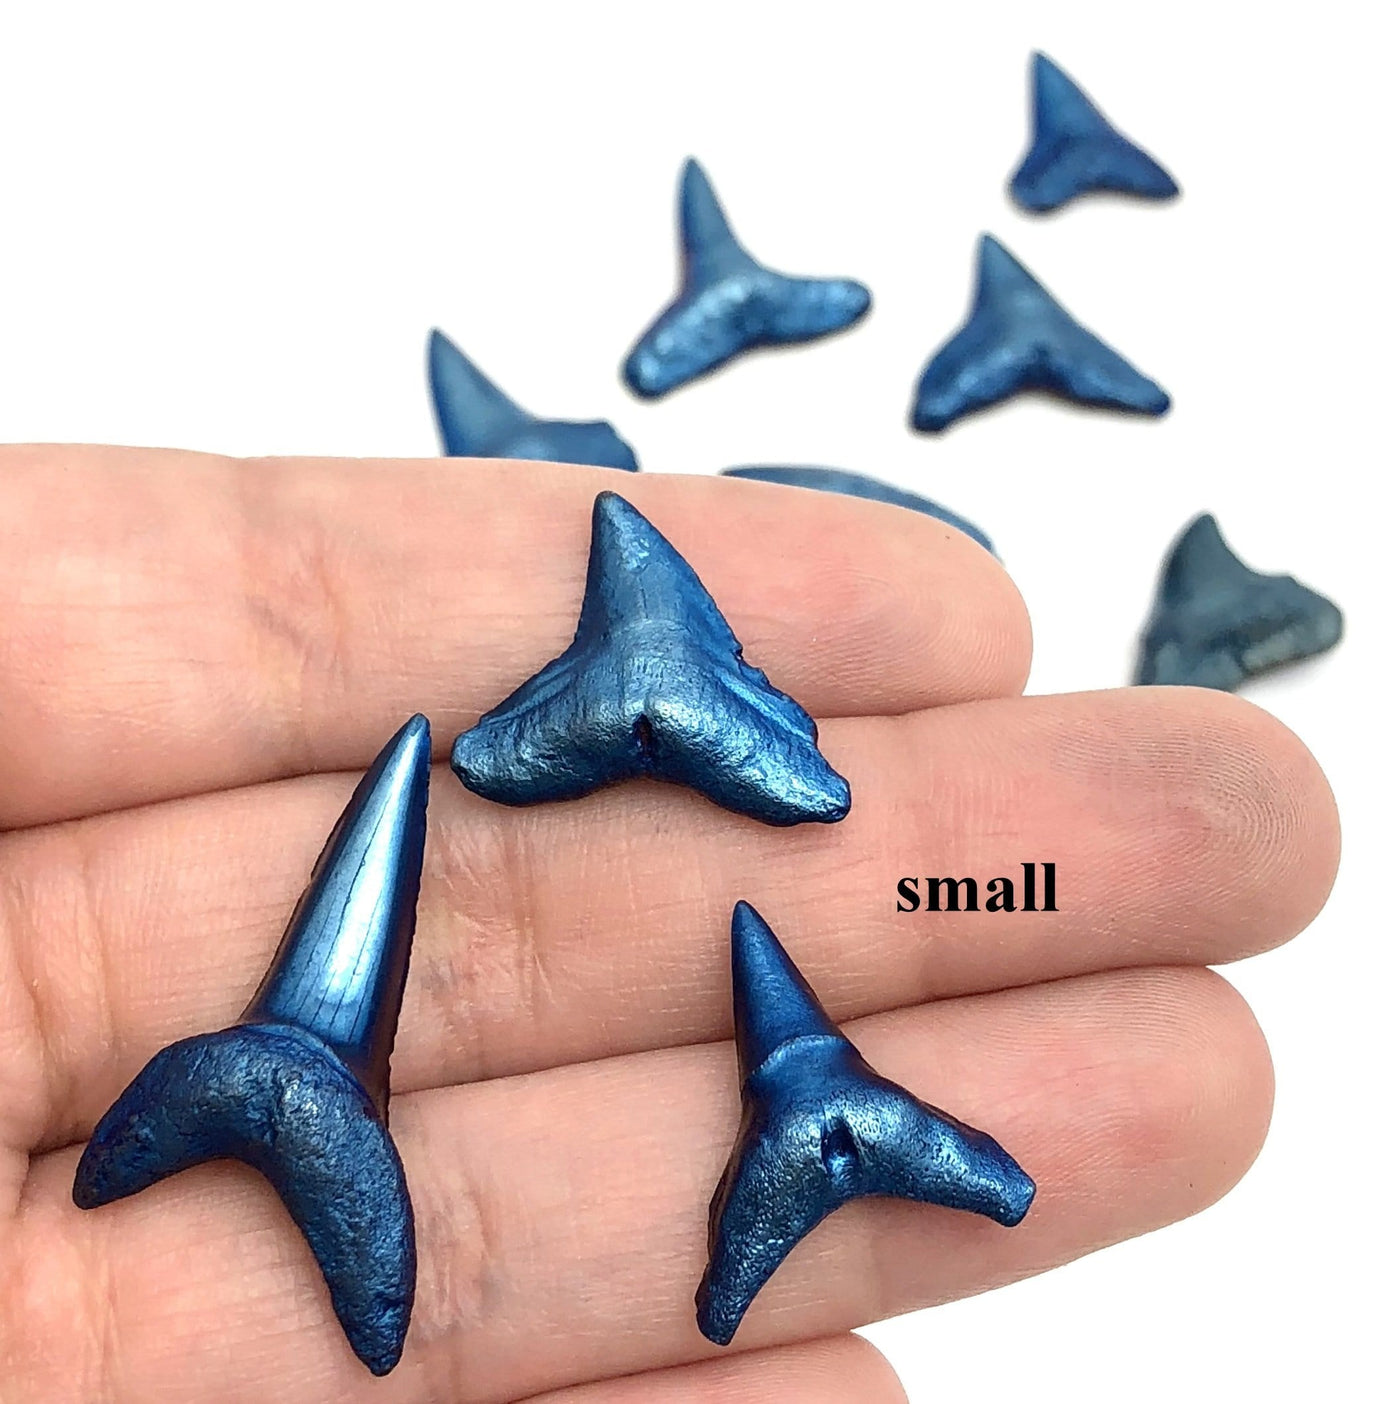 Hand holding up 3 small titanium shark teeth with others in the background